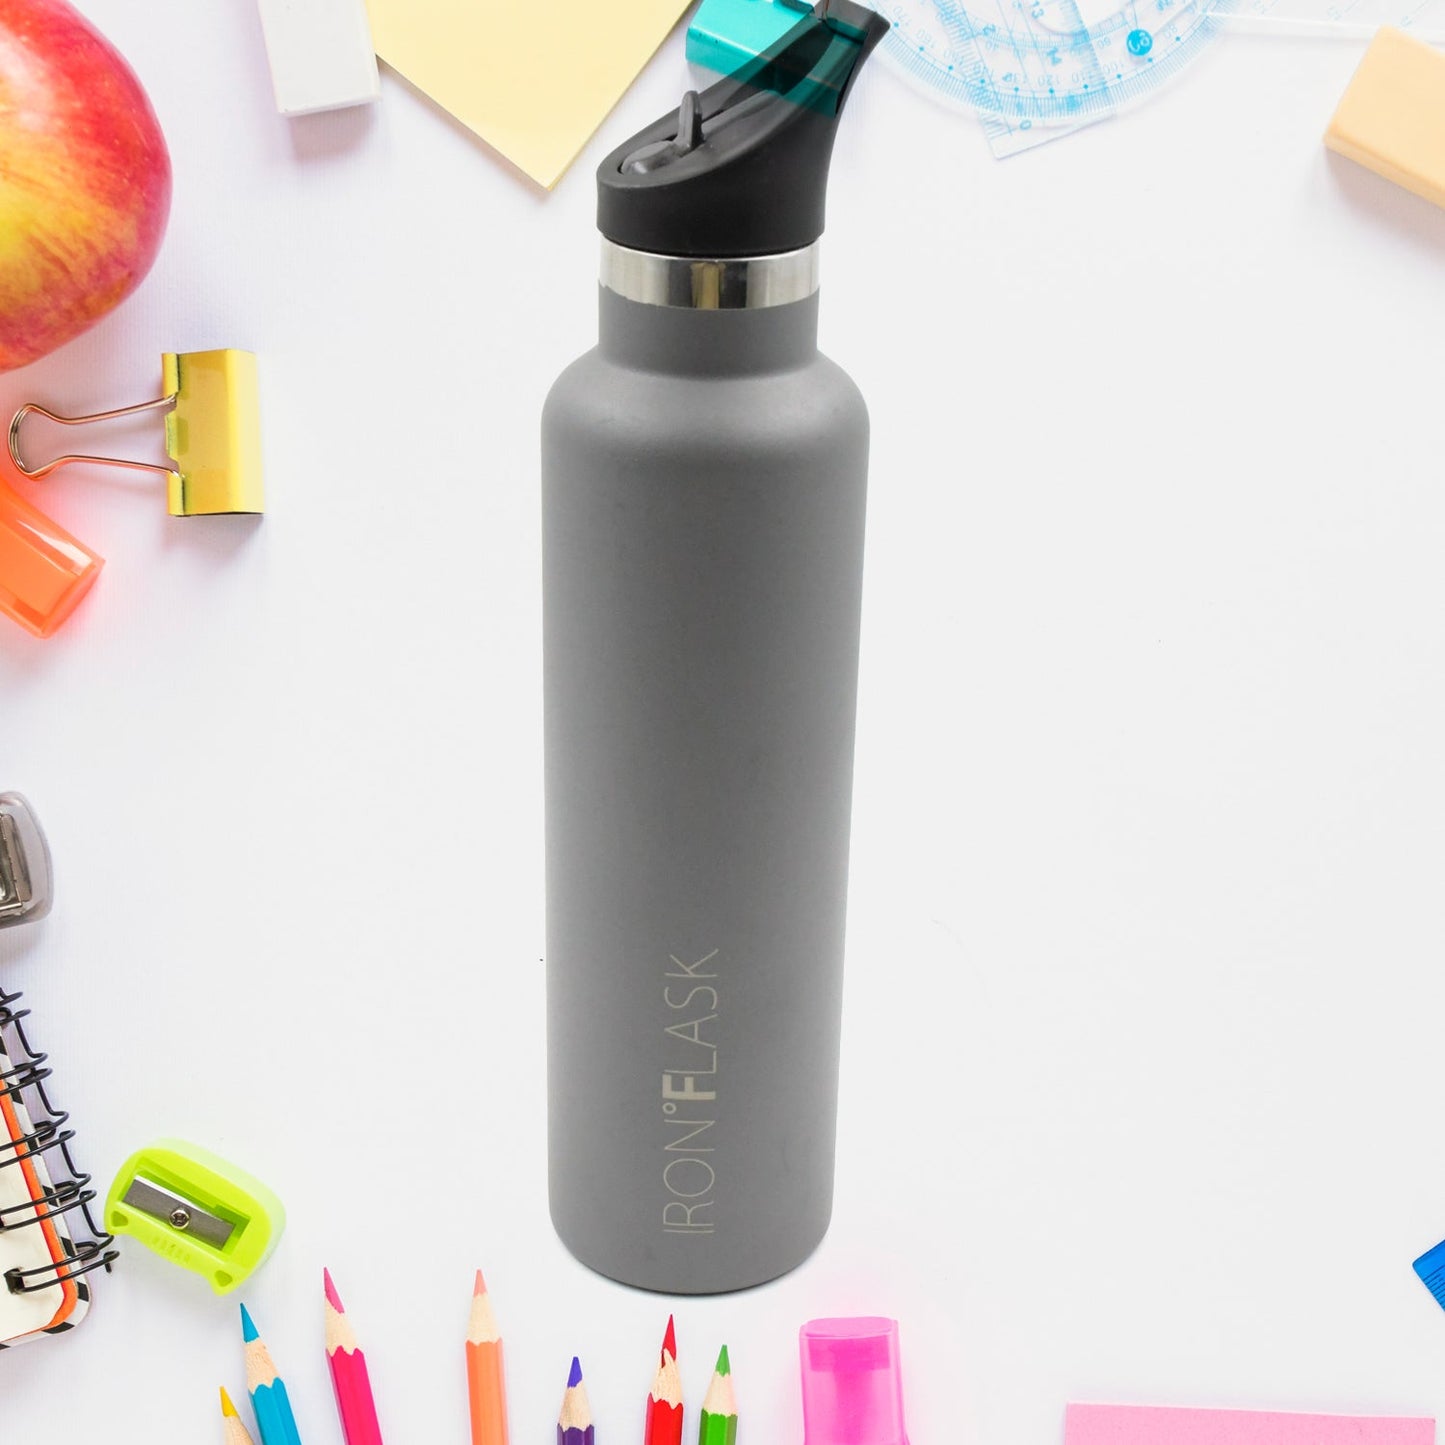 12542 Stainless Steel Vacuum Flask Water Bottle, Fridge Water Bottle, Leak Proof, Rust Proof, Hot & Cold Drinks, Gym BPA Free Food Grade Quality, For office/Gym/School (Approx 1000 ML)